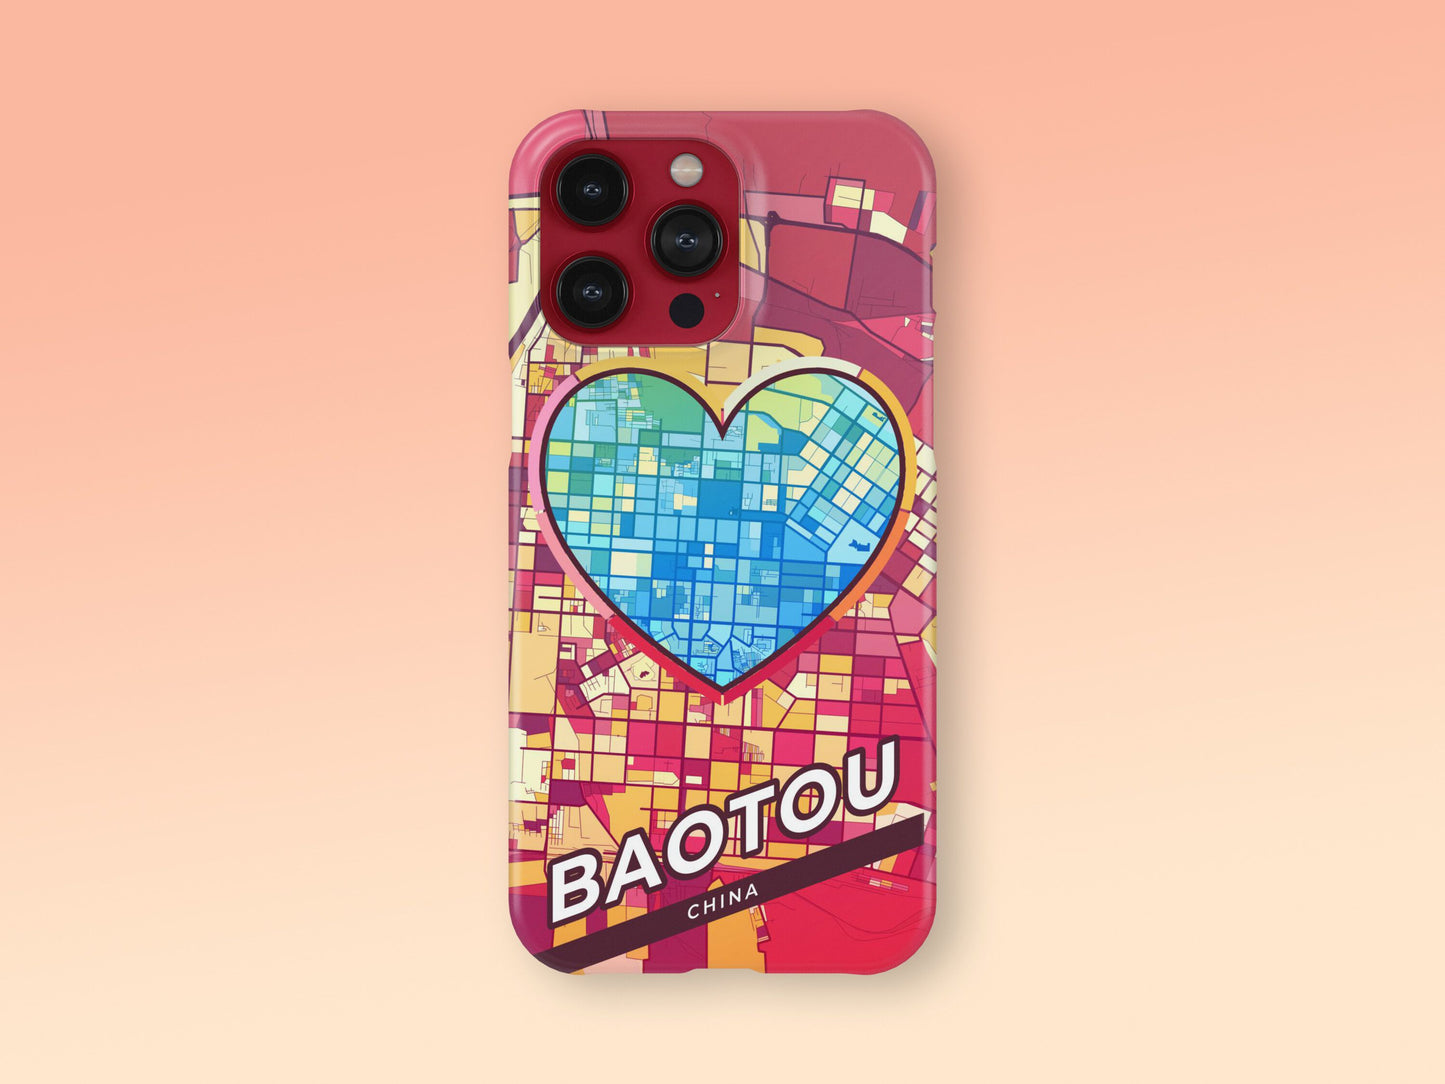 Baotou China slim phone case with colorful icon. Birthday, wedding or housewarming gift. Couple match cases. 2